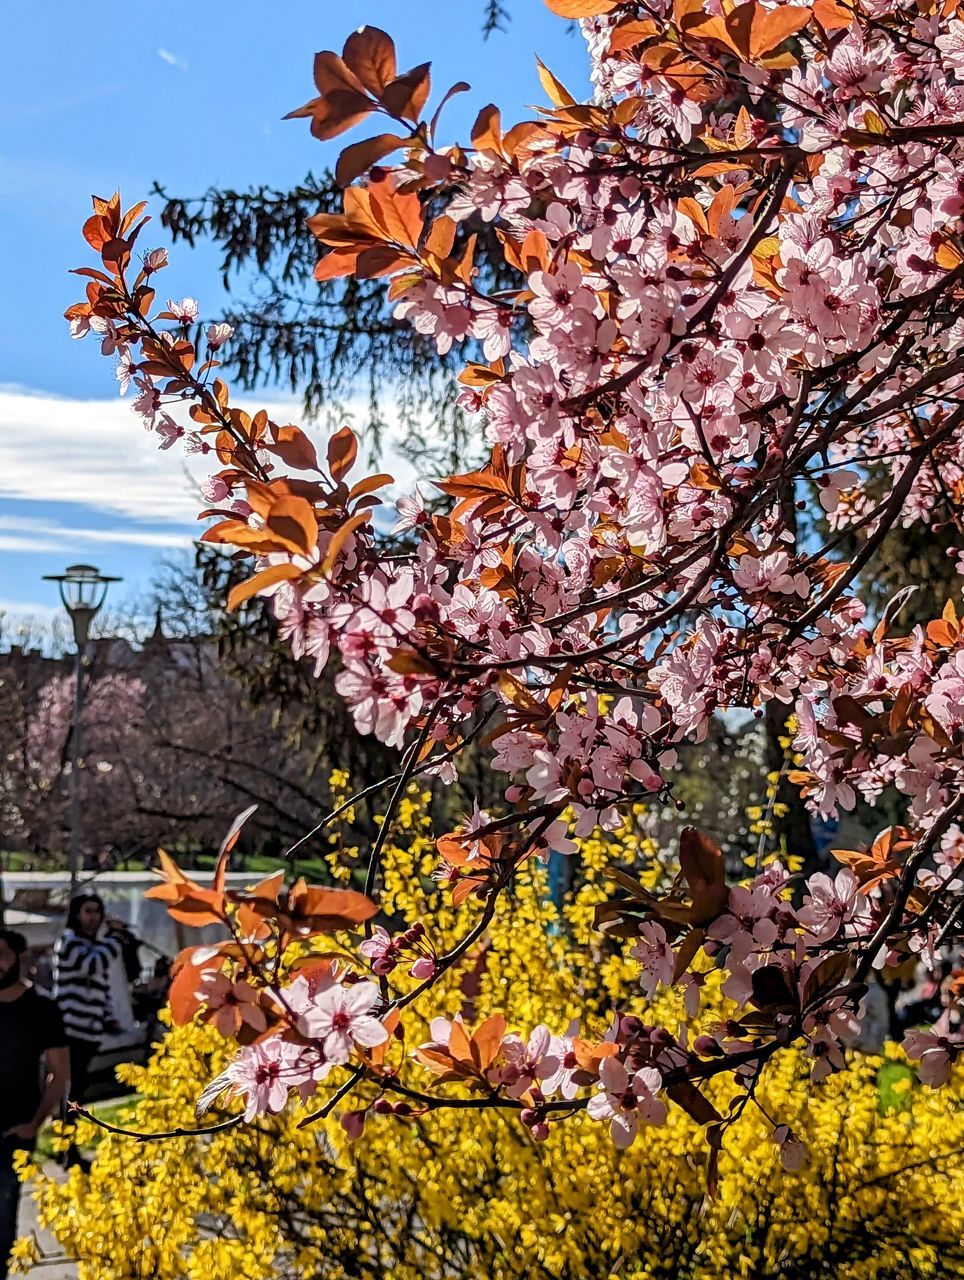 plant, tree, flower, nature, beauty in nature, sky, flowering plant, blossom, growth, springtime, freshness, autumn, fragility, day, leaf, branch, no people, outdoors, spring, cherry blossom, low angle view, cloud, scenics - nature, sunlight, tranquility